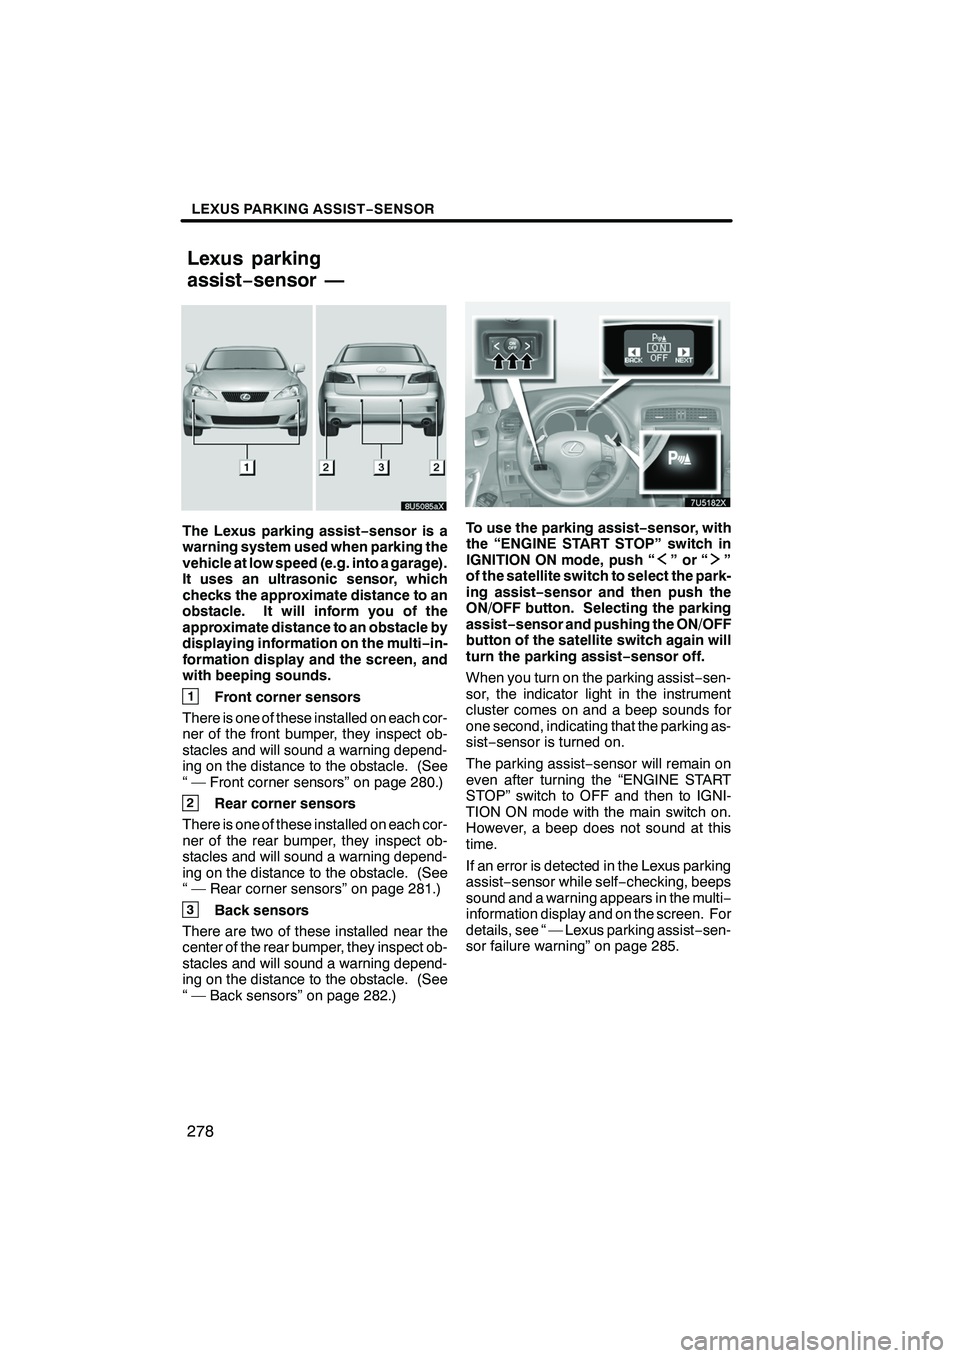 Lexus IS250 2009  Navigation Manual Finish
LEXUS PARKING ASSIST−SENSOR
278
The Lexus parking assist−sensor is a
warning system used when parking the
vehicle at low speed (e.g. into a garage).
It uses an ultrasonic sensor, which
chec